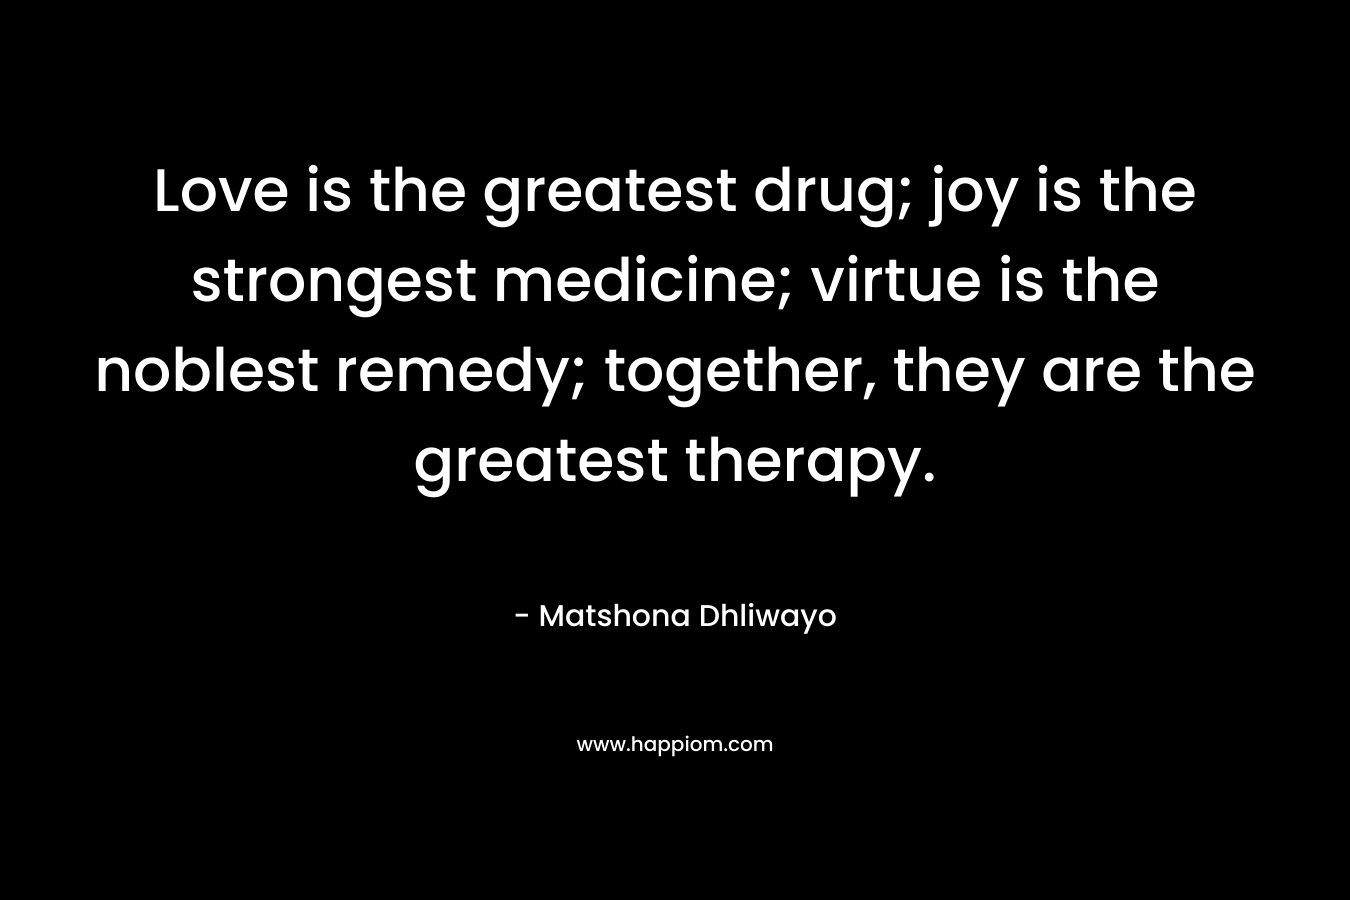 Love is the greatest drug; joy is the strongest medicine; virtue is the noblest remedy; together, they are the greatest therapy.